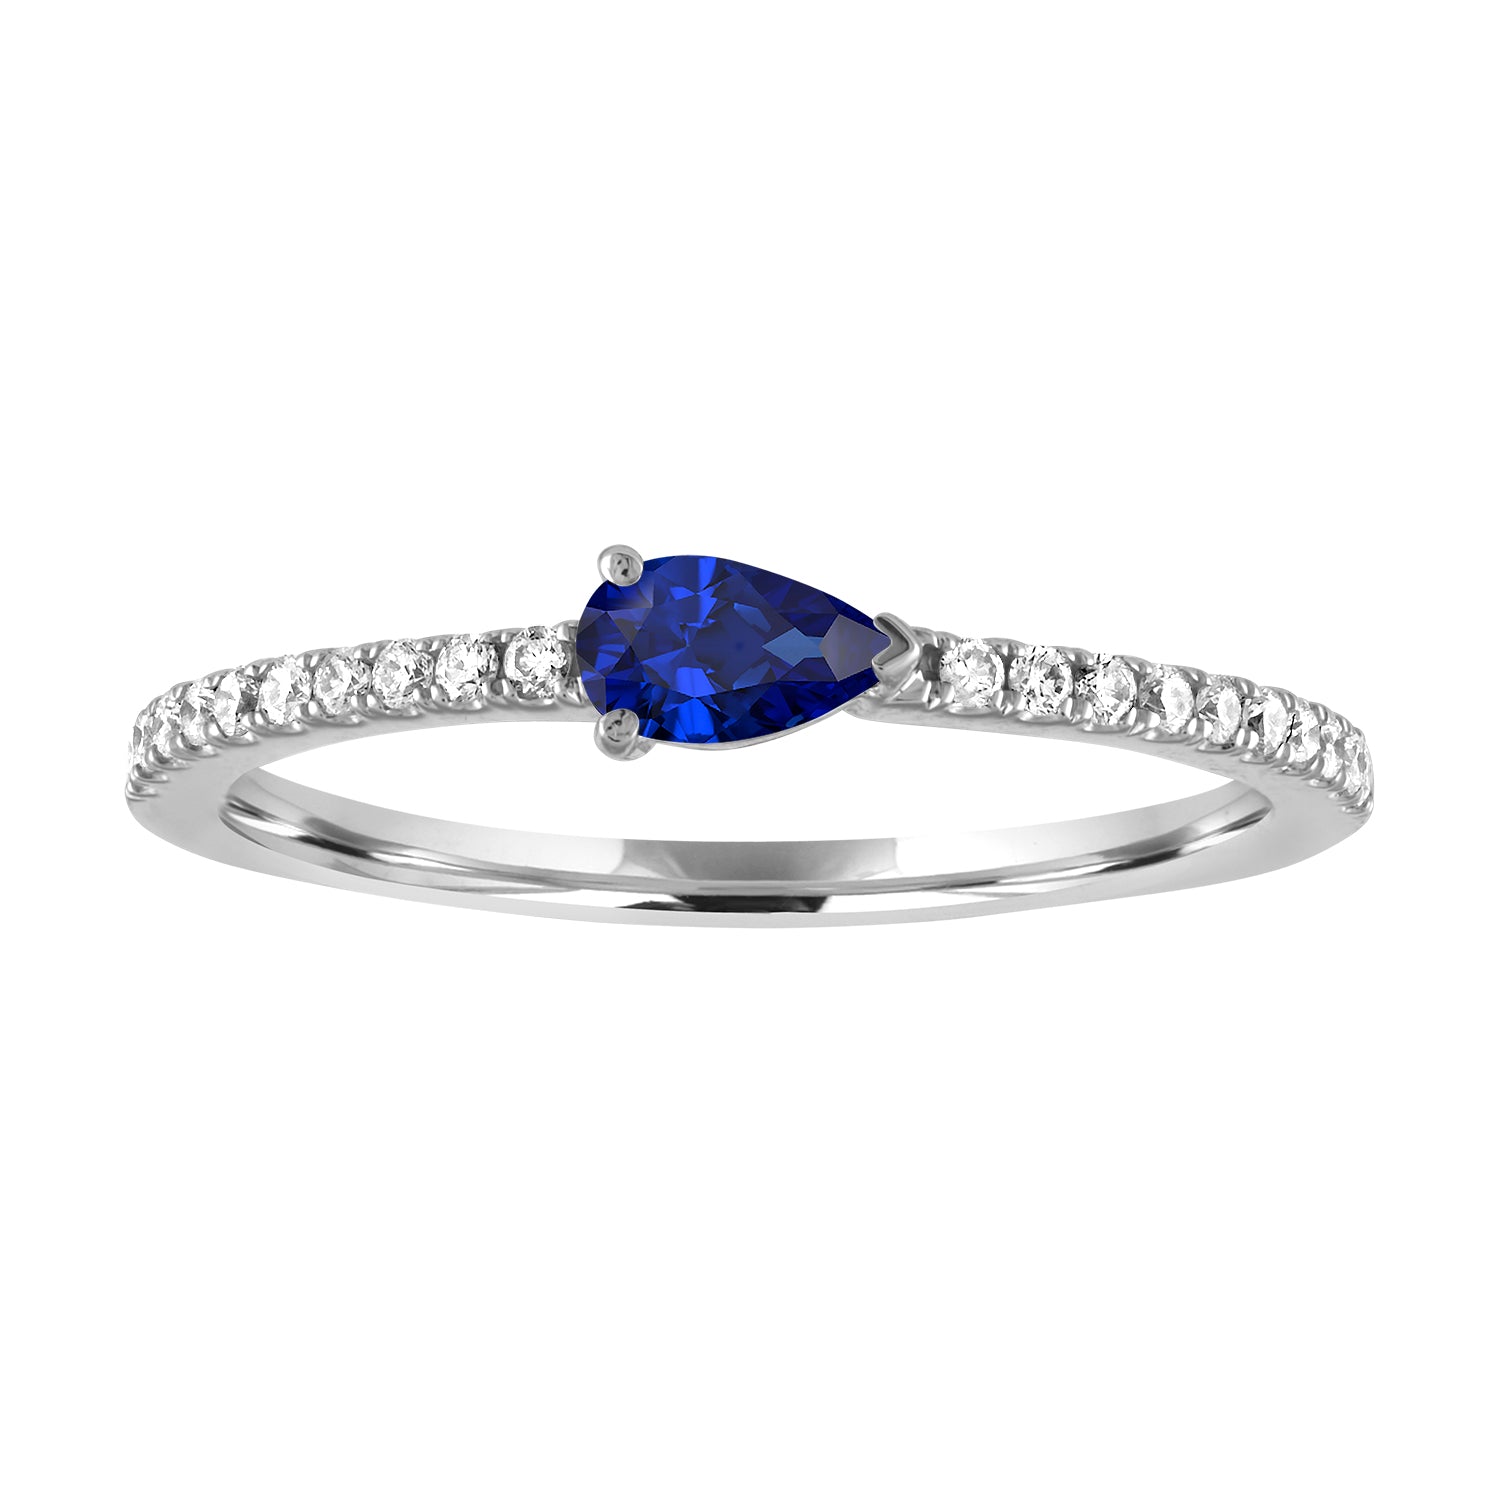 White gold skinny band with a pear shaped sapphire in the center and round diamonds on the shank. 